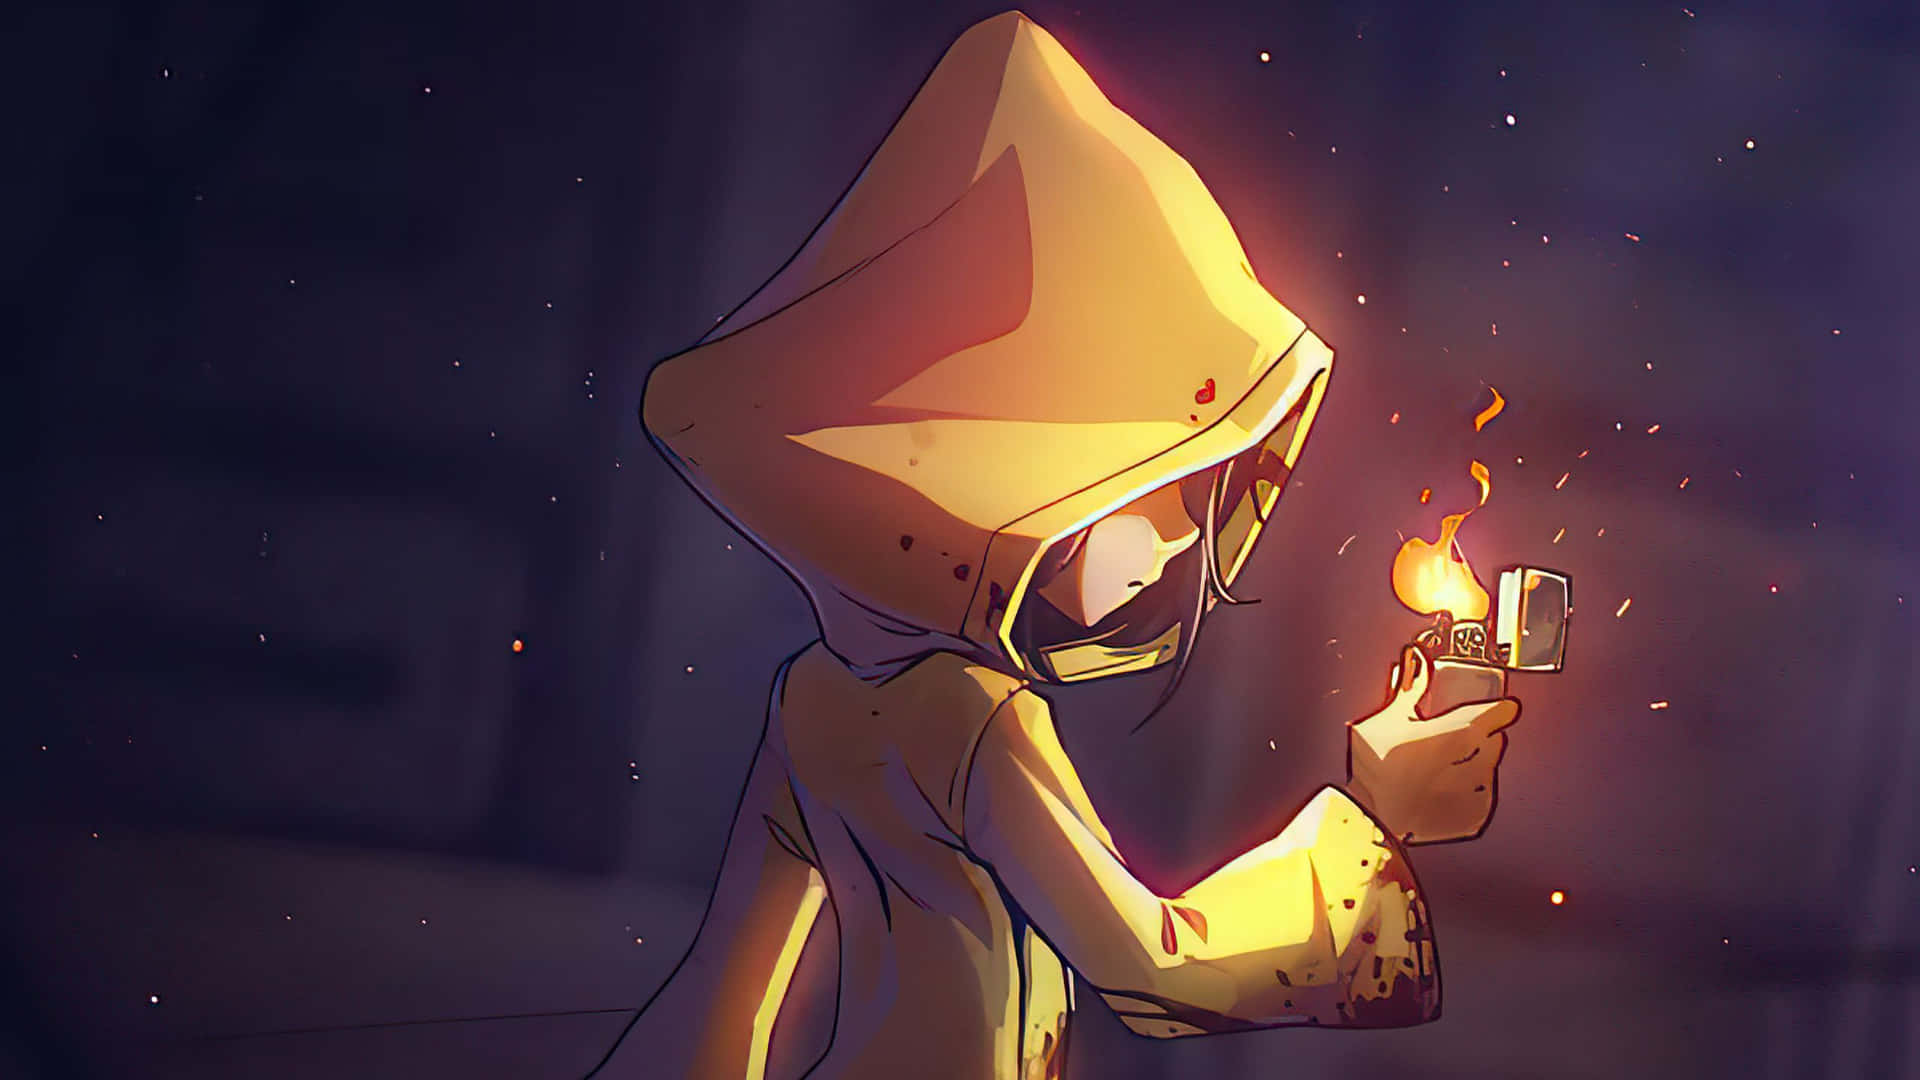 A bone-chilling journey through a dark and mysterious world in Little Nightmares.